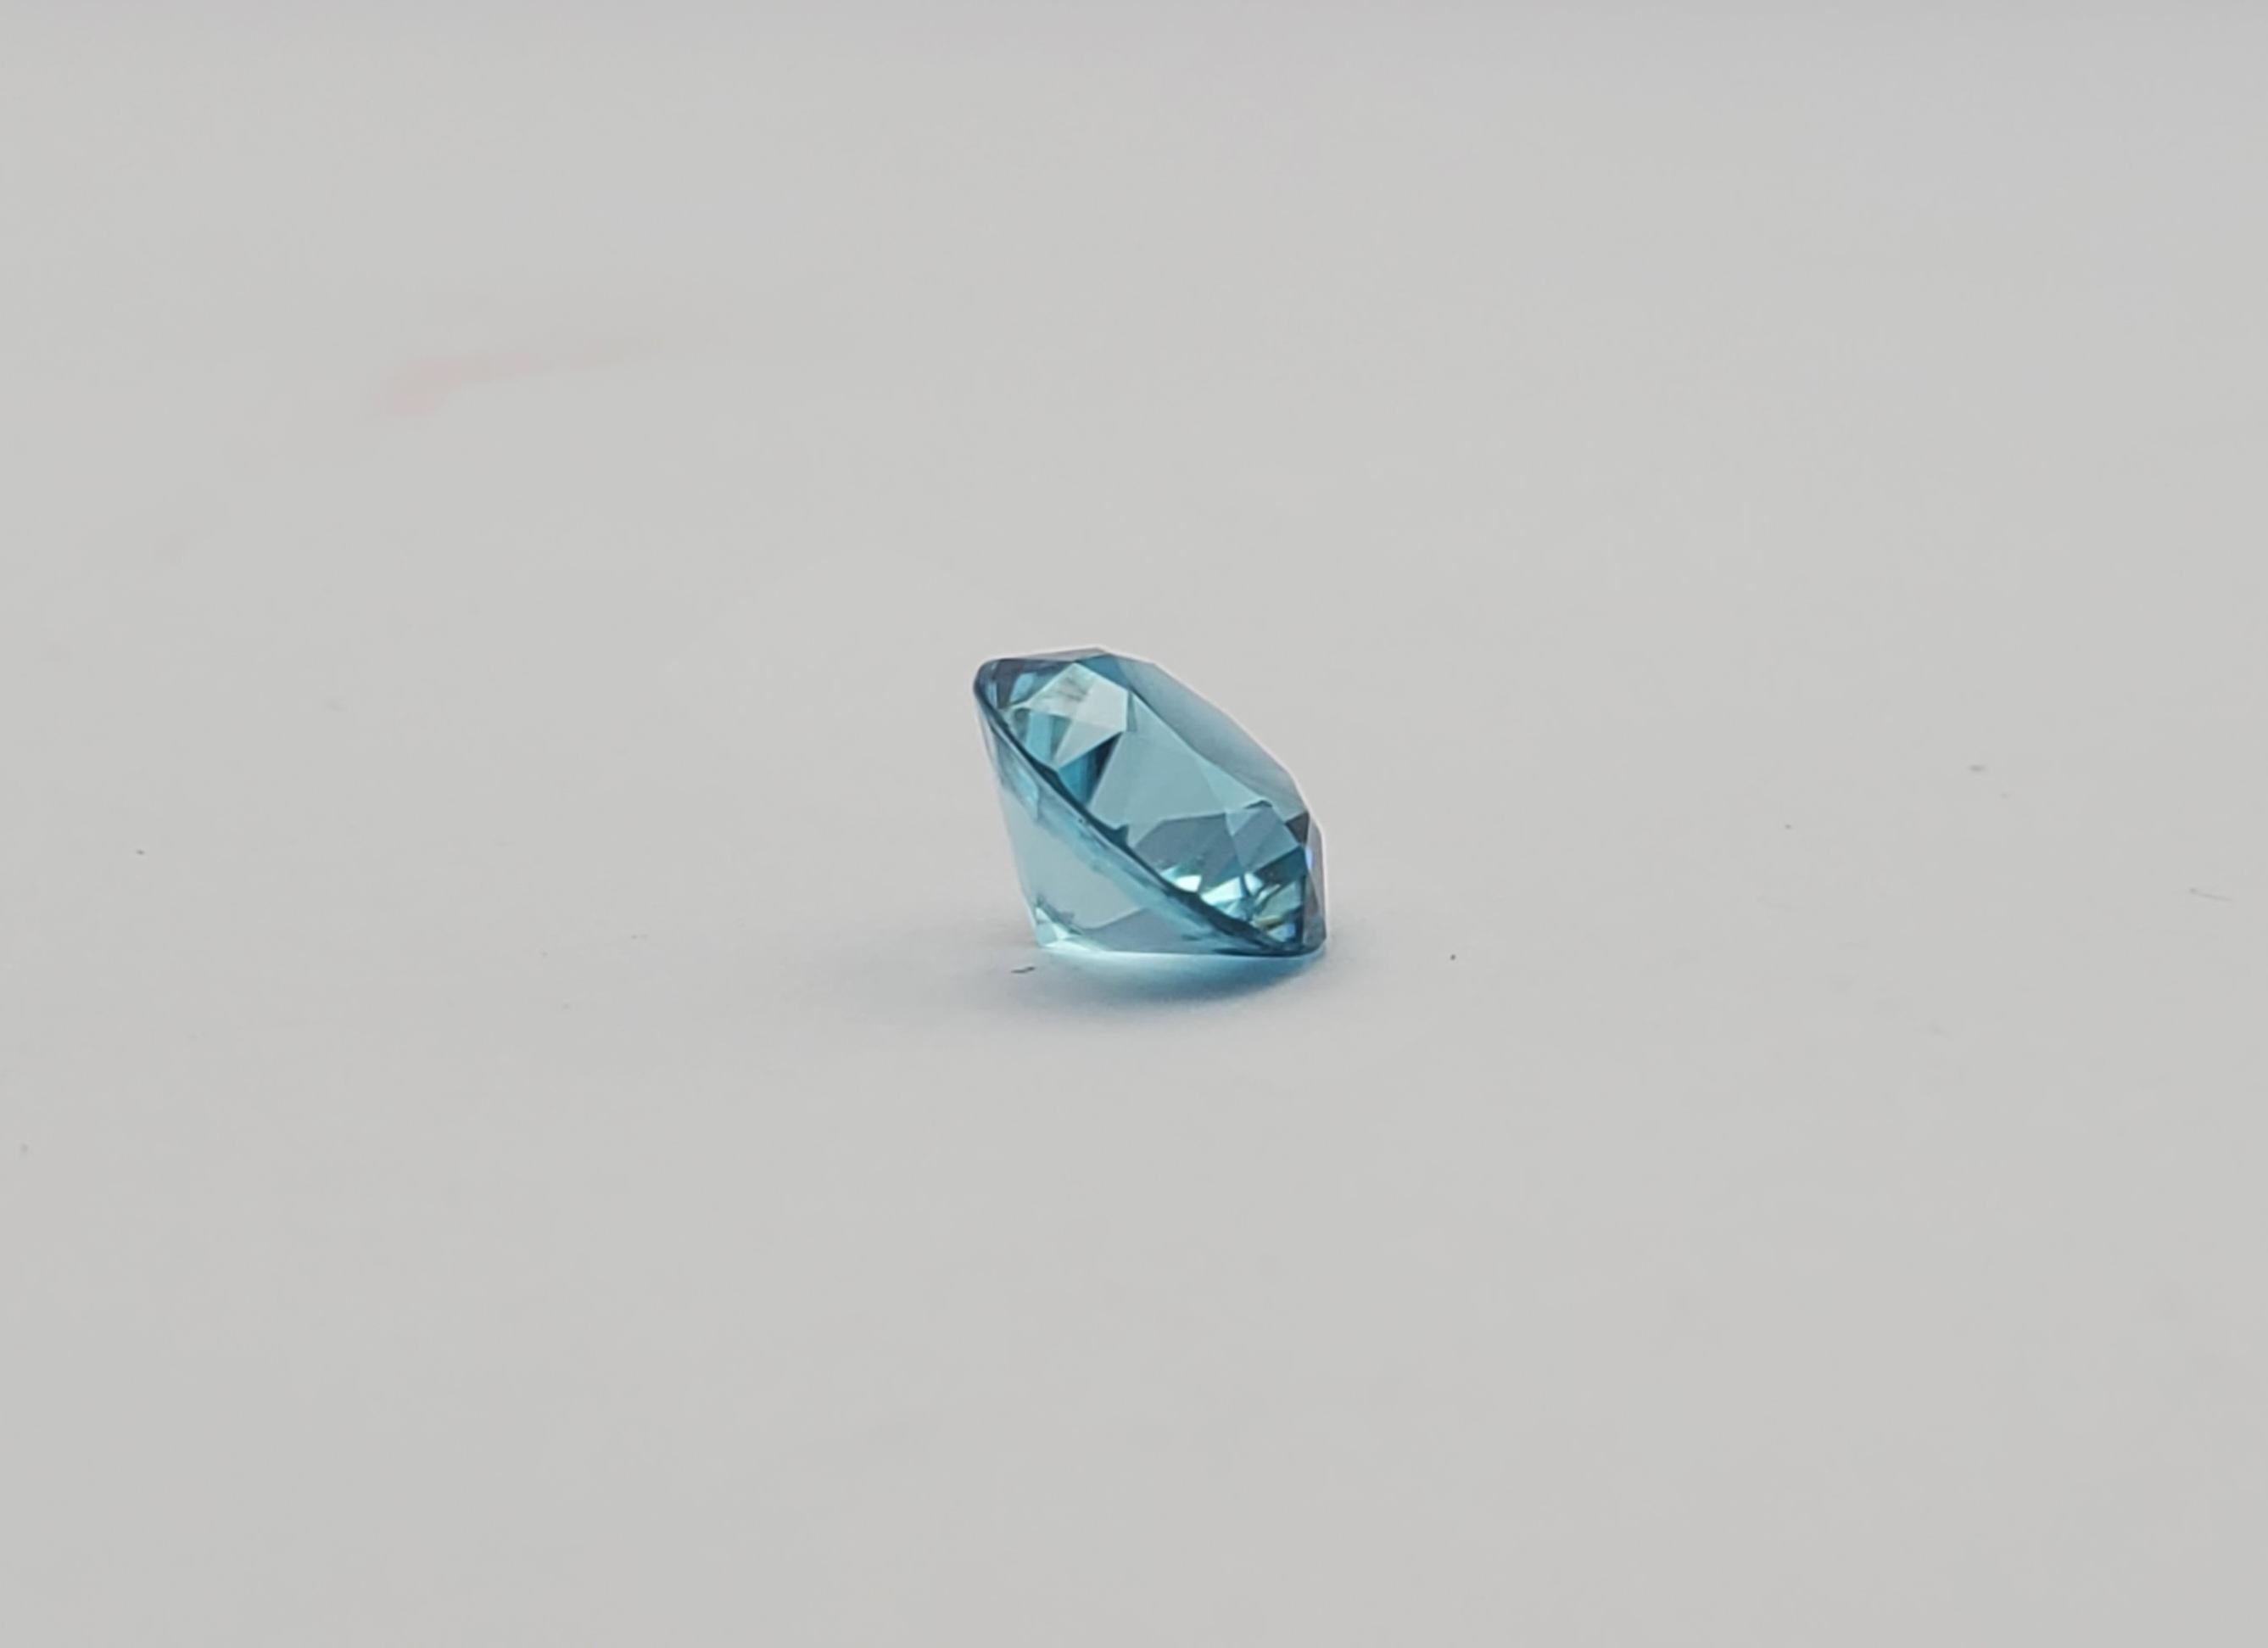 Stunning transparent 2.93ct round blue zircon. Its significant size and electric beauty will captivate the gaze of those who appreciate fine gems. The gemstone measures 8.02-8.04 x 5.20 mm, making a bold statement in any setting. The vibrant aqua